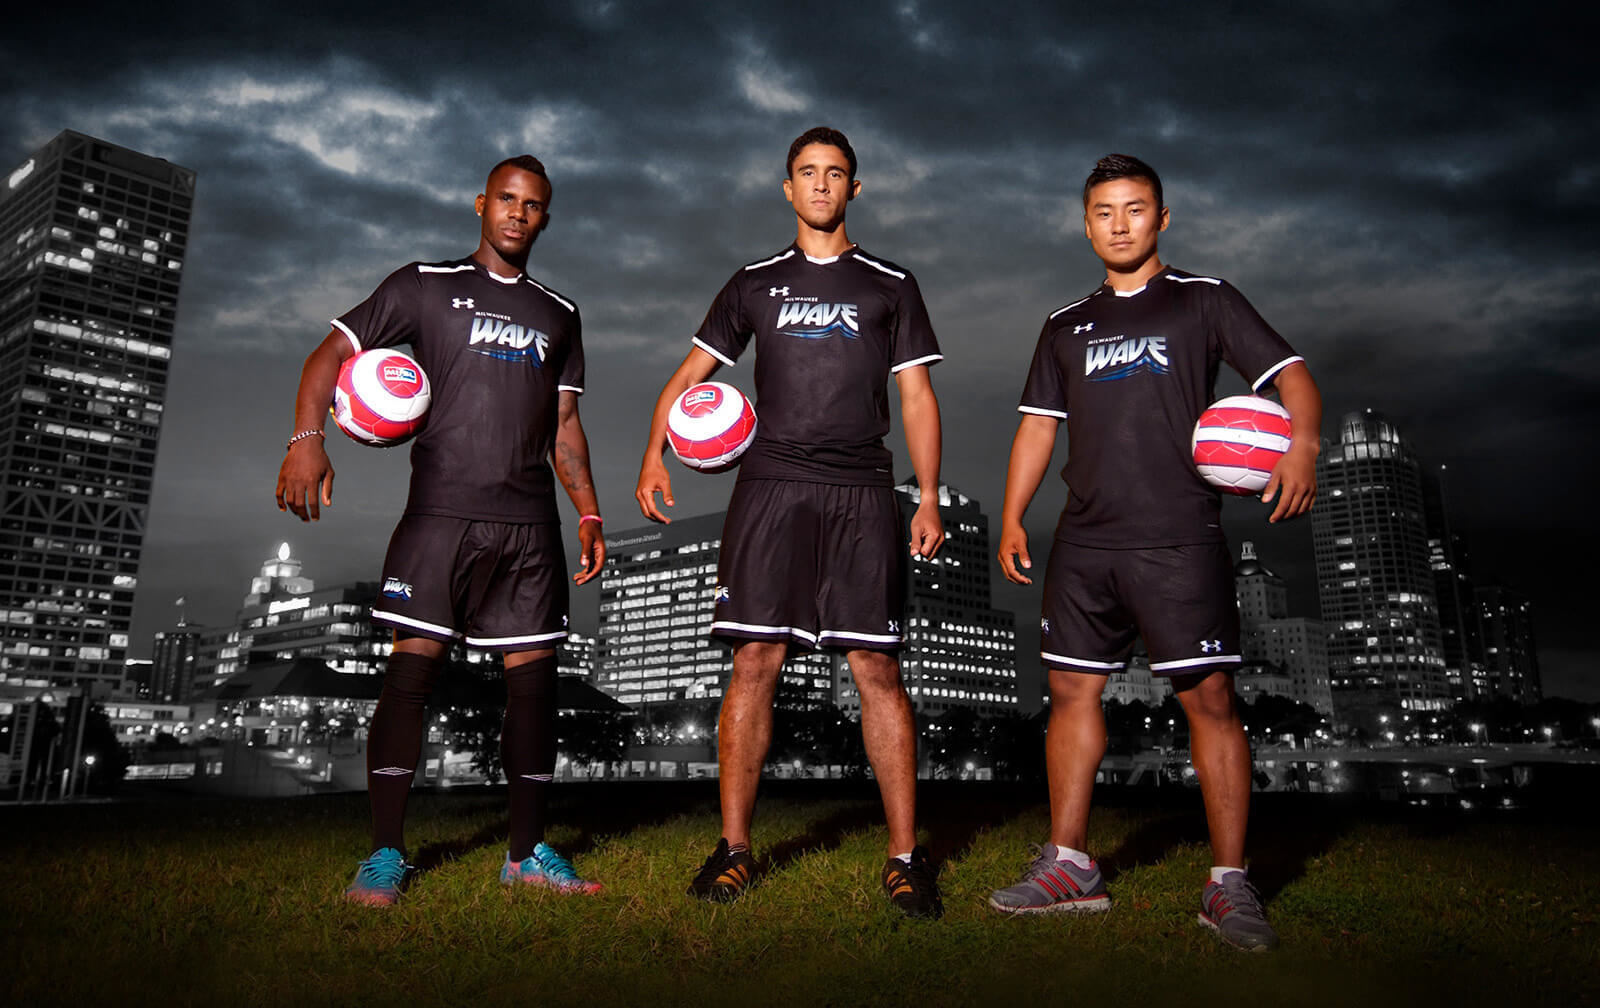 iNET photographs Soccer Players for the Milwaukee Wave